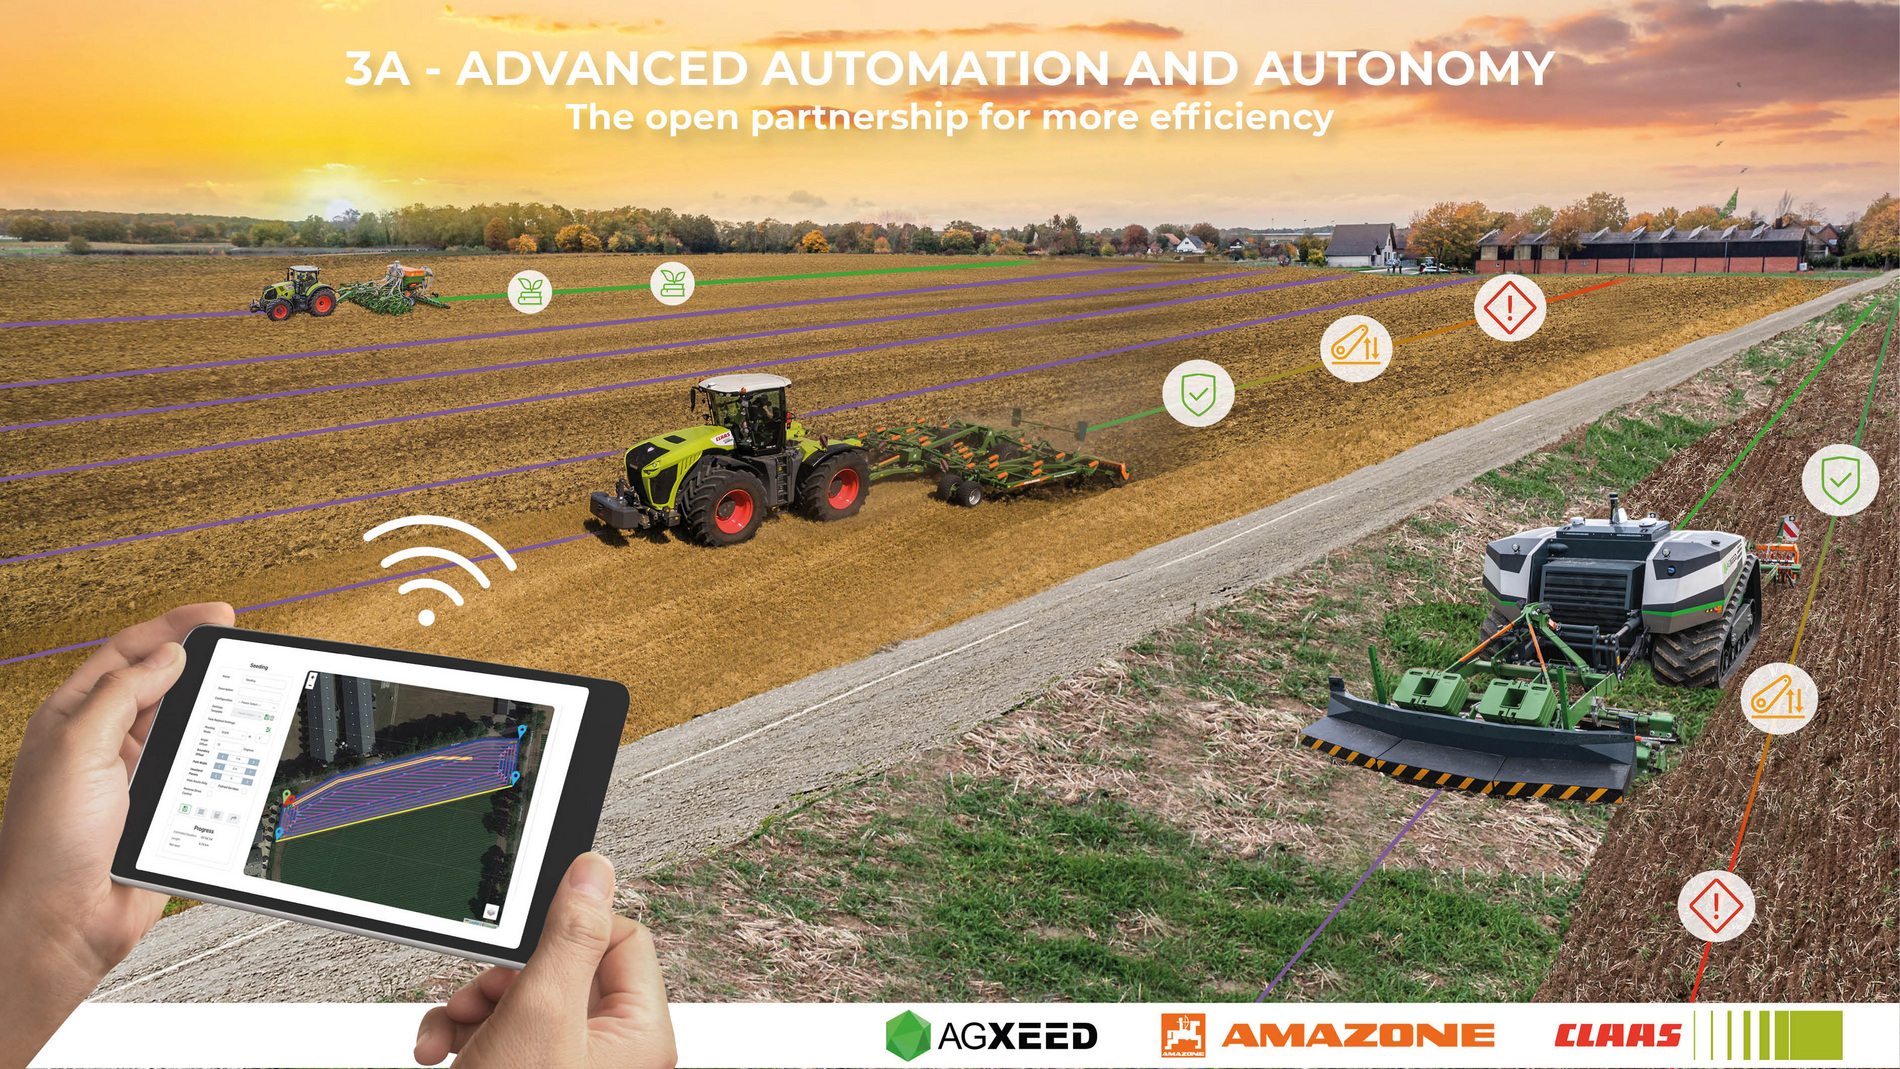 Advanced Automation and Autonomy connects autonomous and traditional farming equipment.